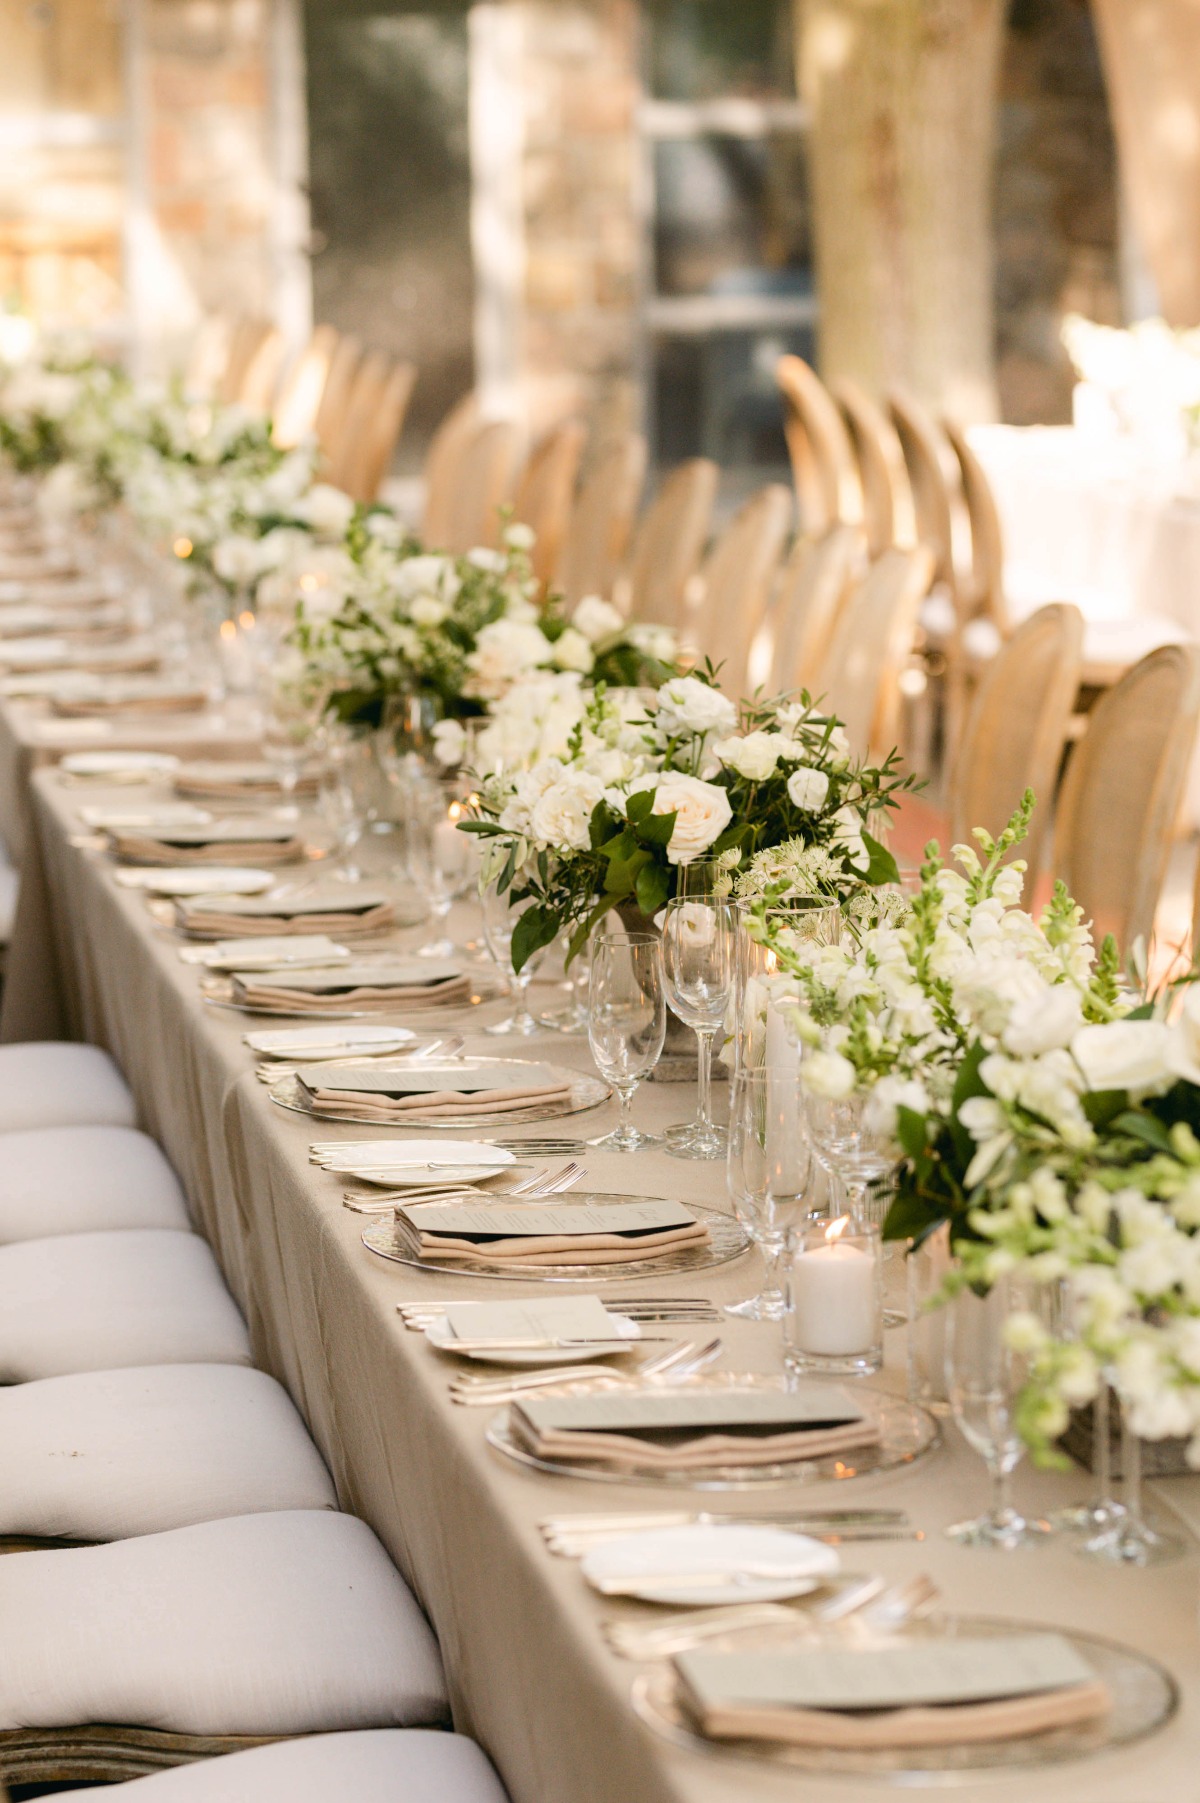 Neutral pink and white reception decor